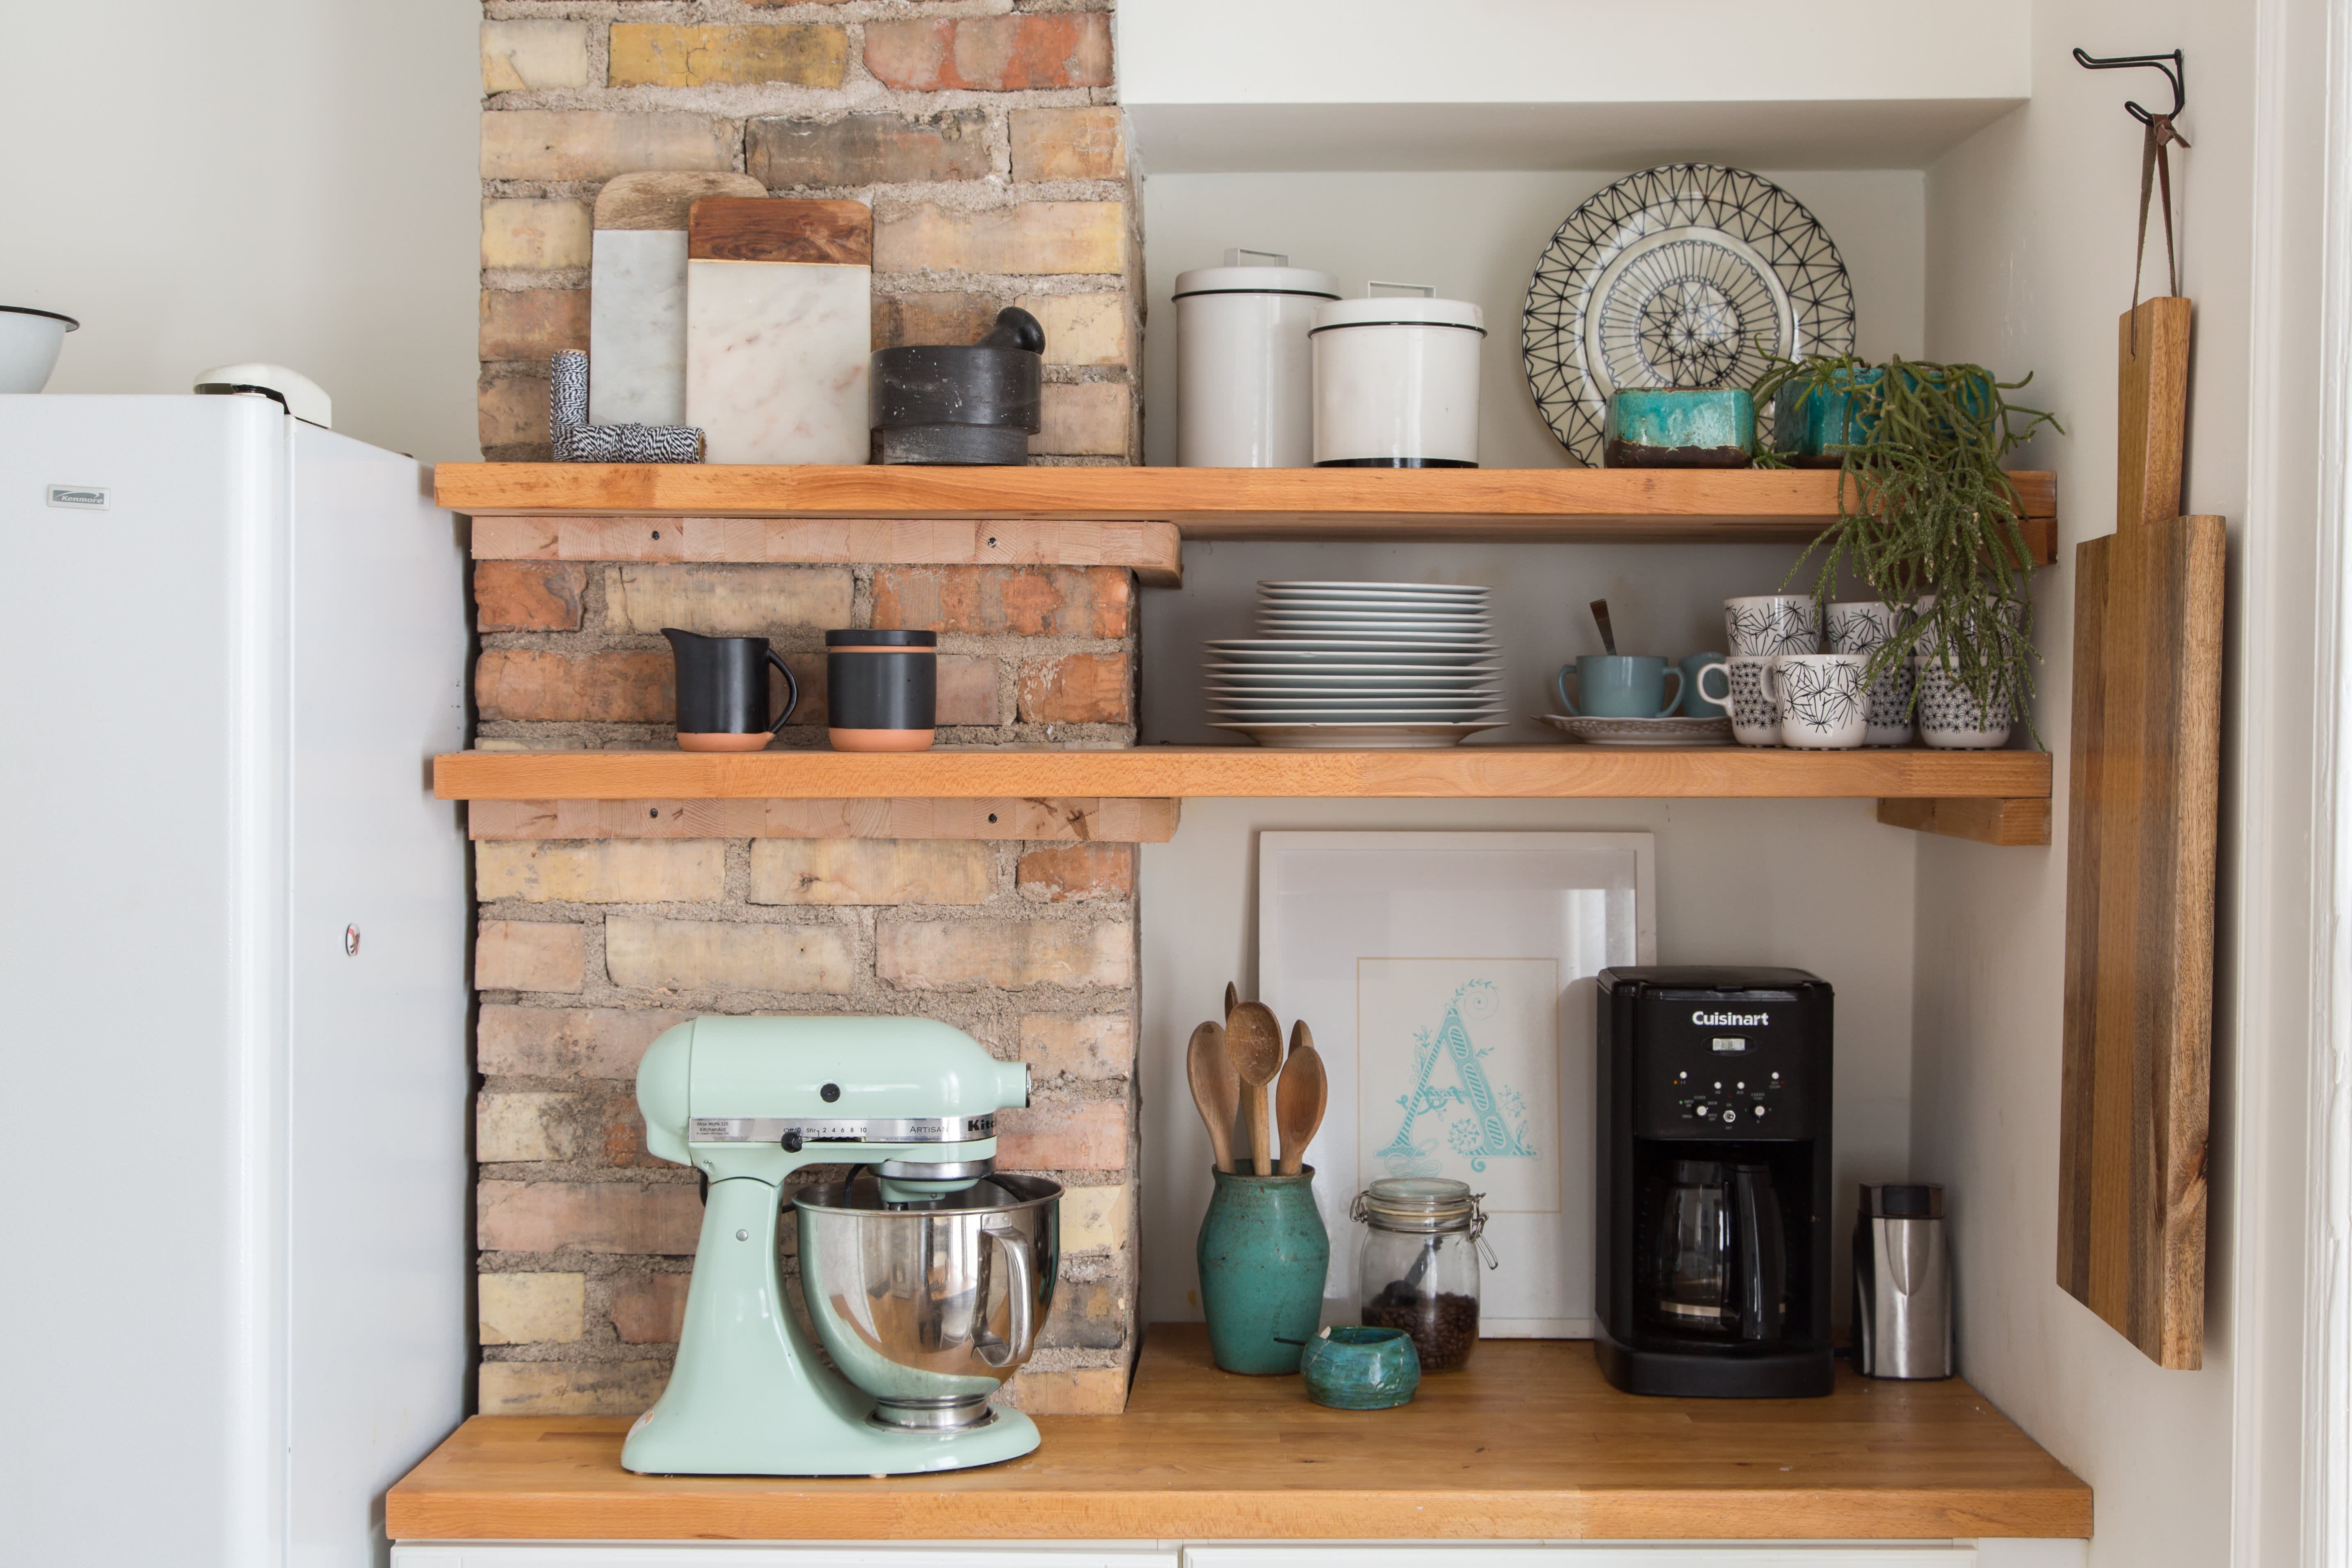 10 Snazzy Ways to Organize and Store Small Appliances Kitchn